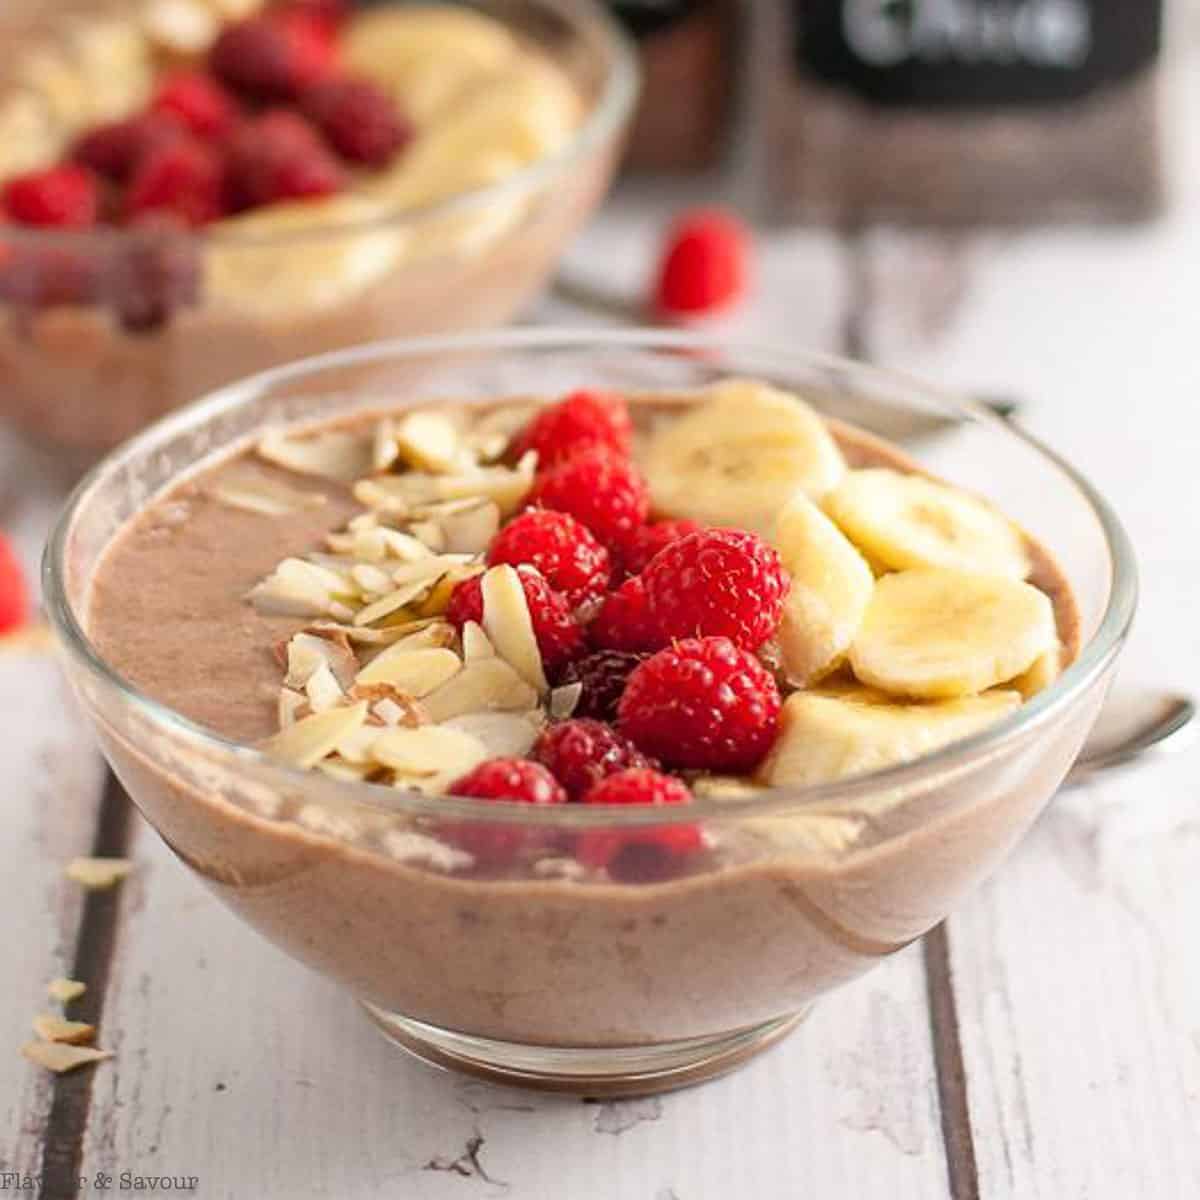 close up view of a smoothie bowl garnished with raspberries, banana slices and flaked almonds